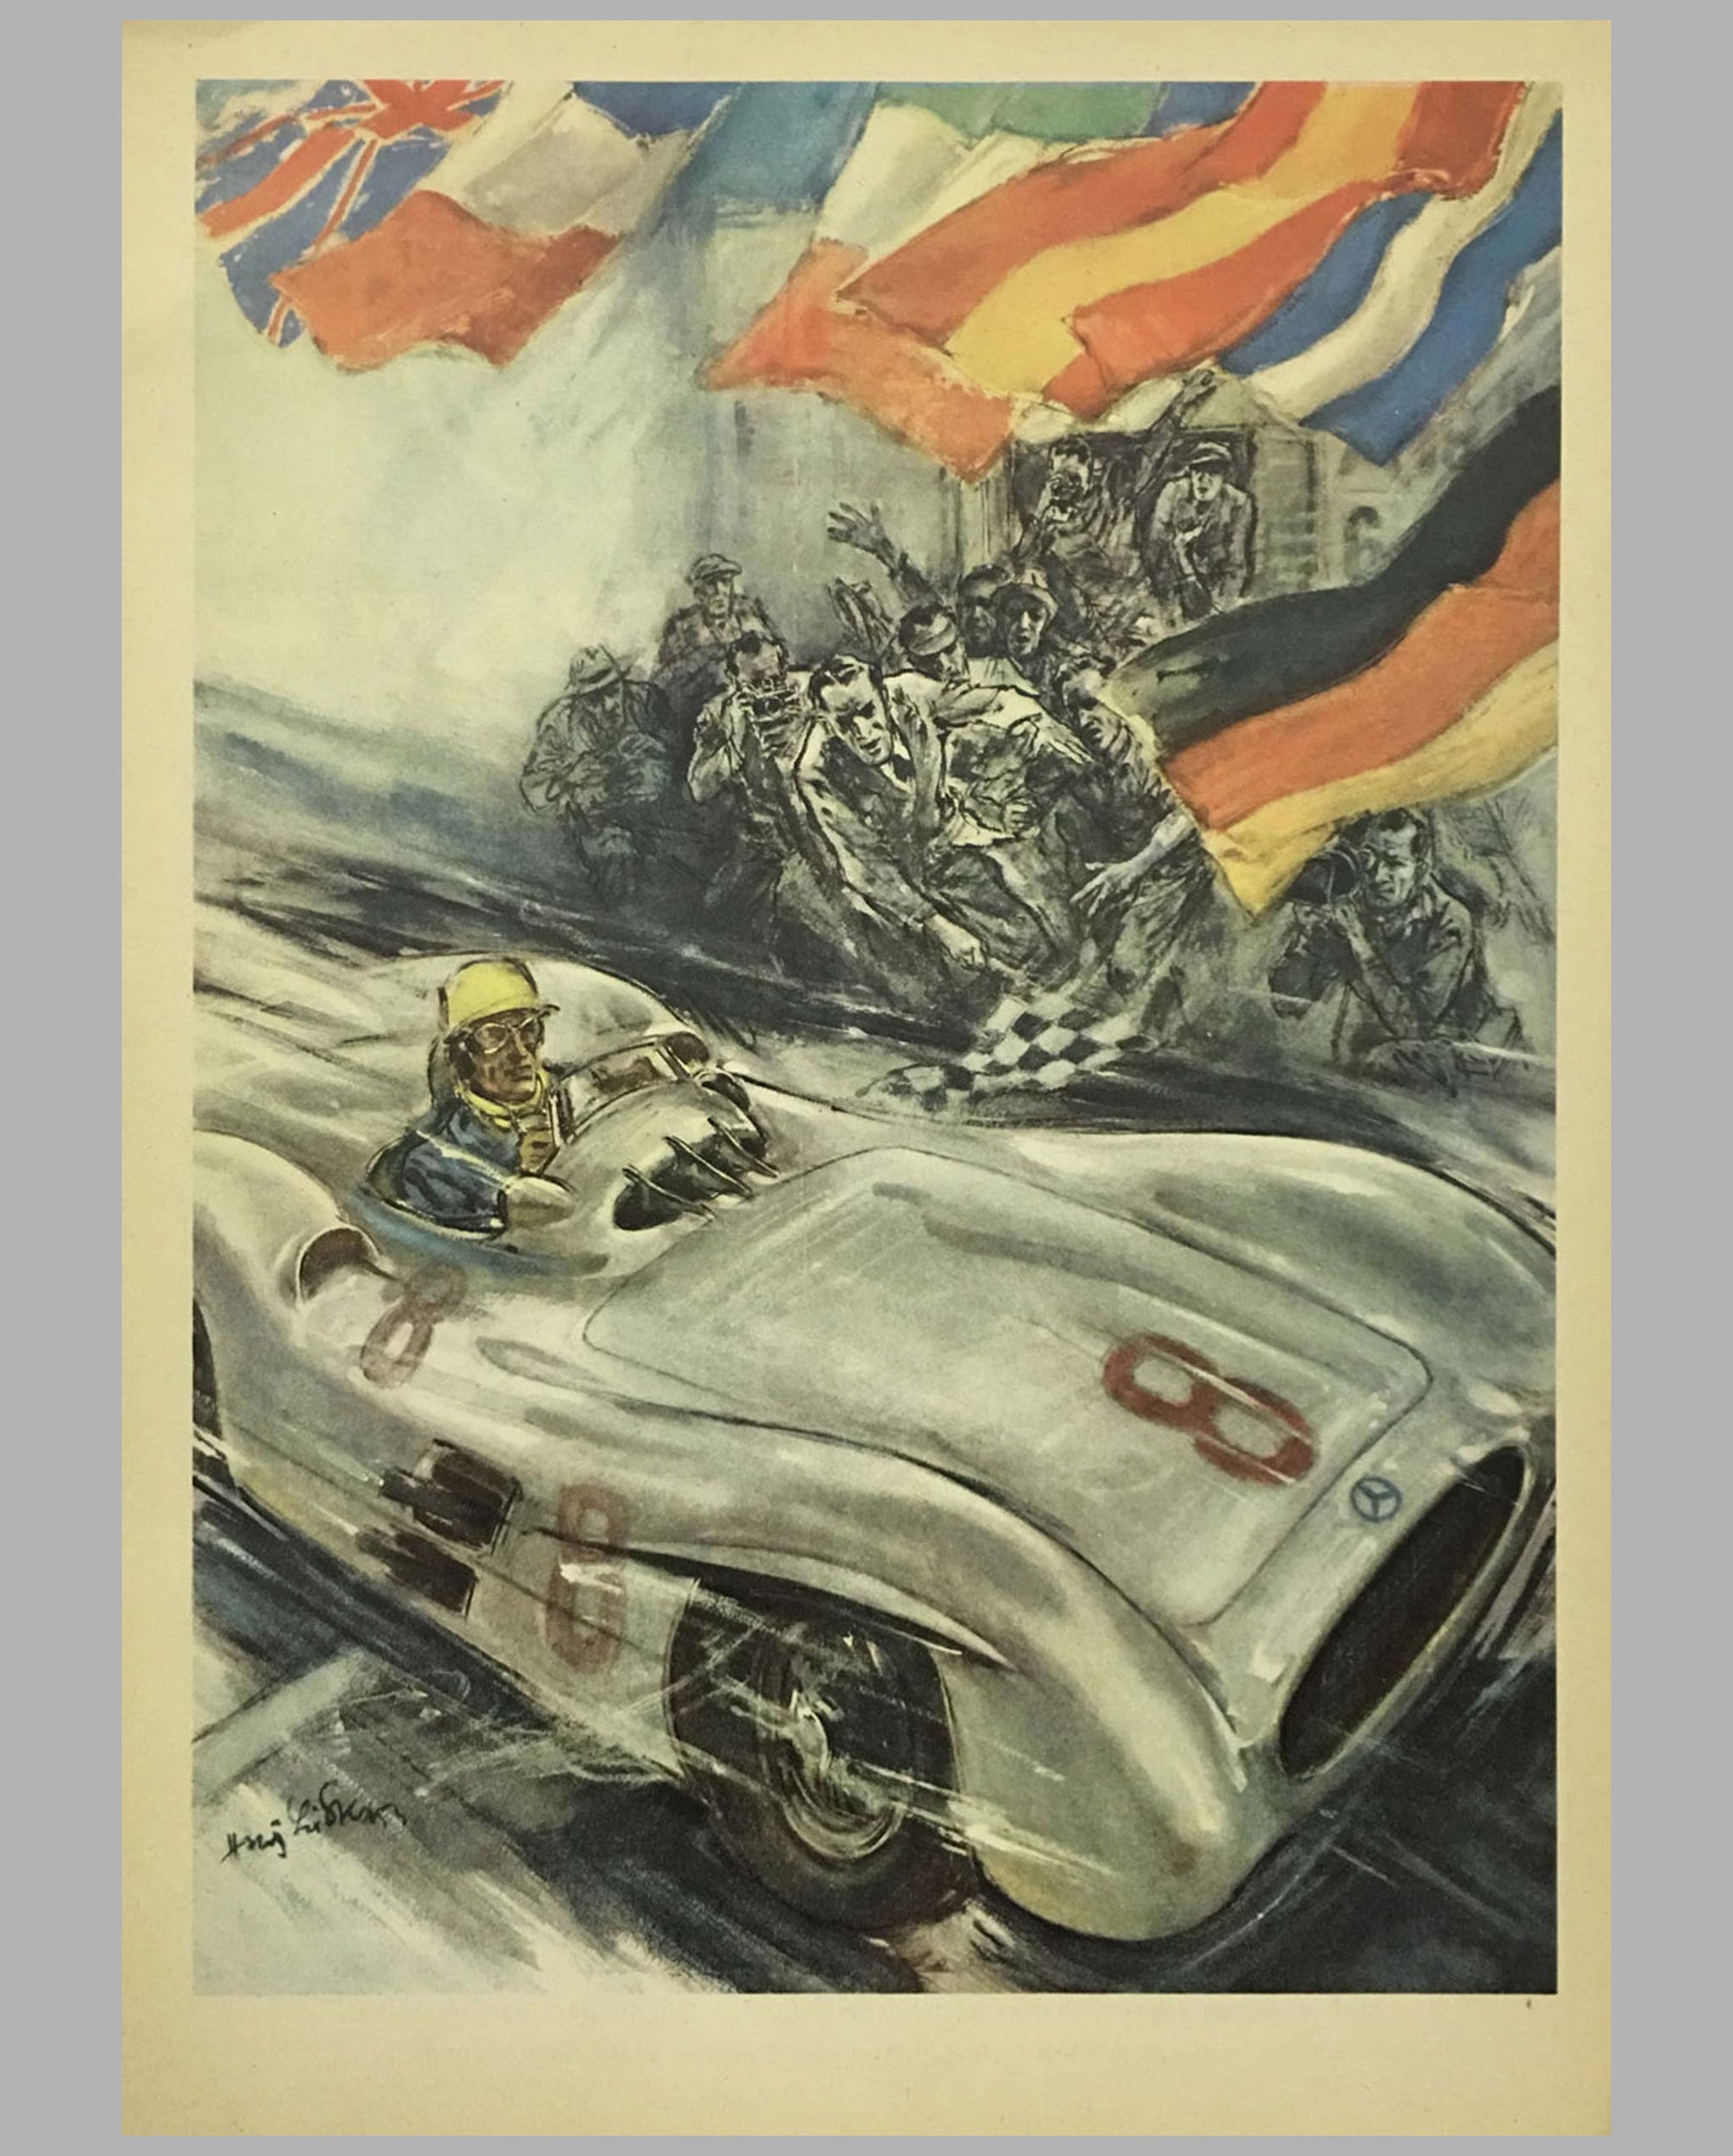 1954 1955 Mercedes Benz original victory poster by Hans Lisa, front